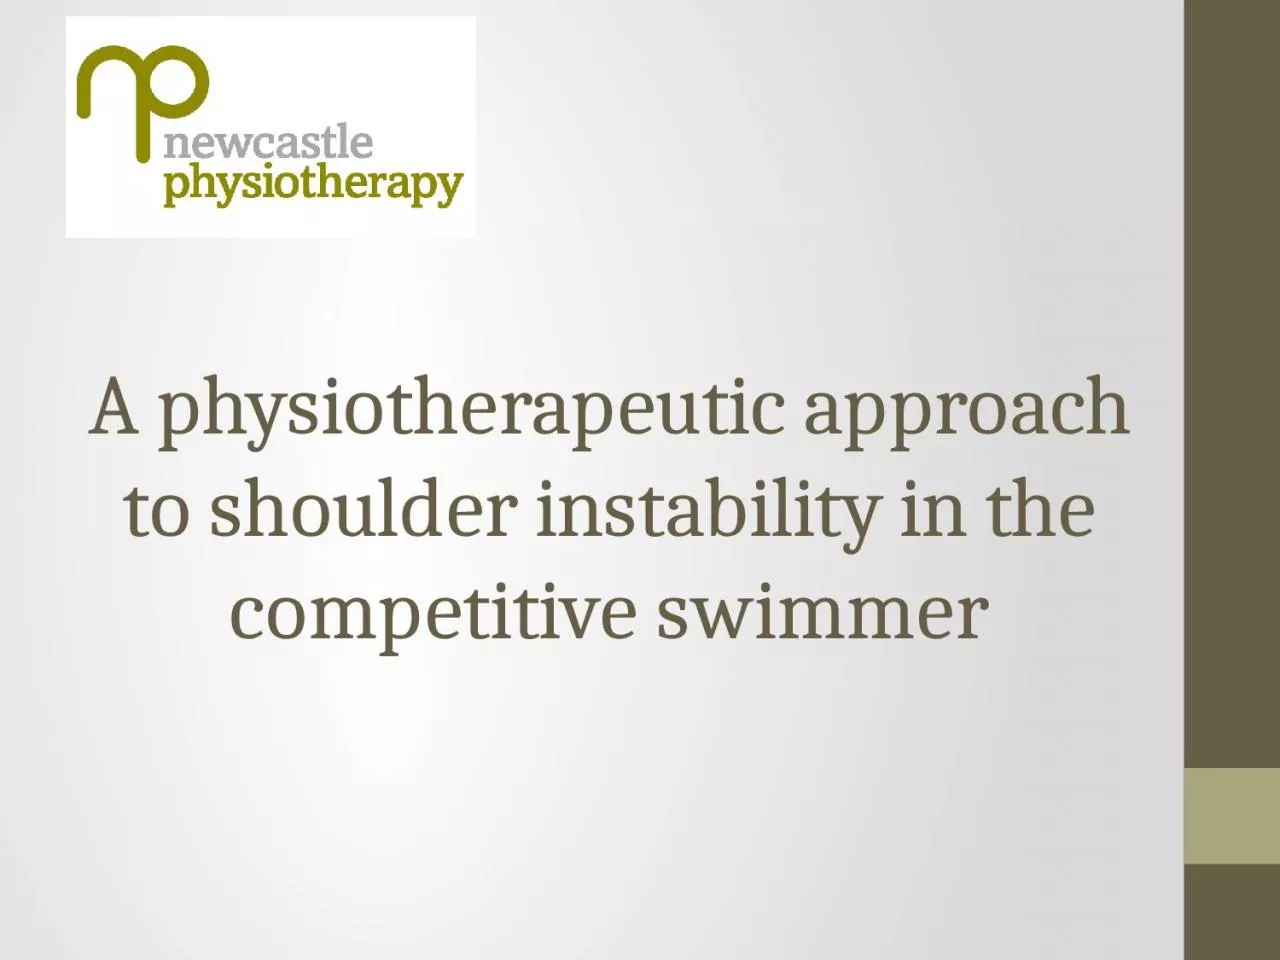 A physiotherapeutic approach to shoulder instability in the competitive swimmer